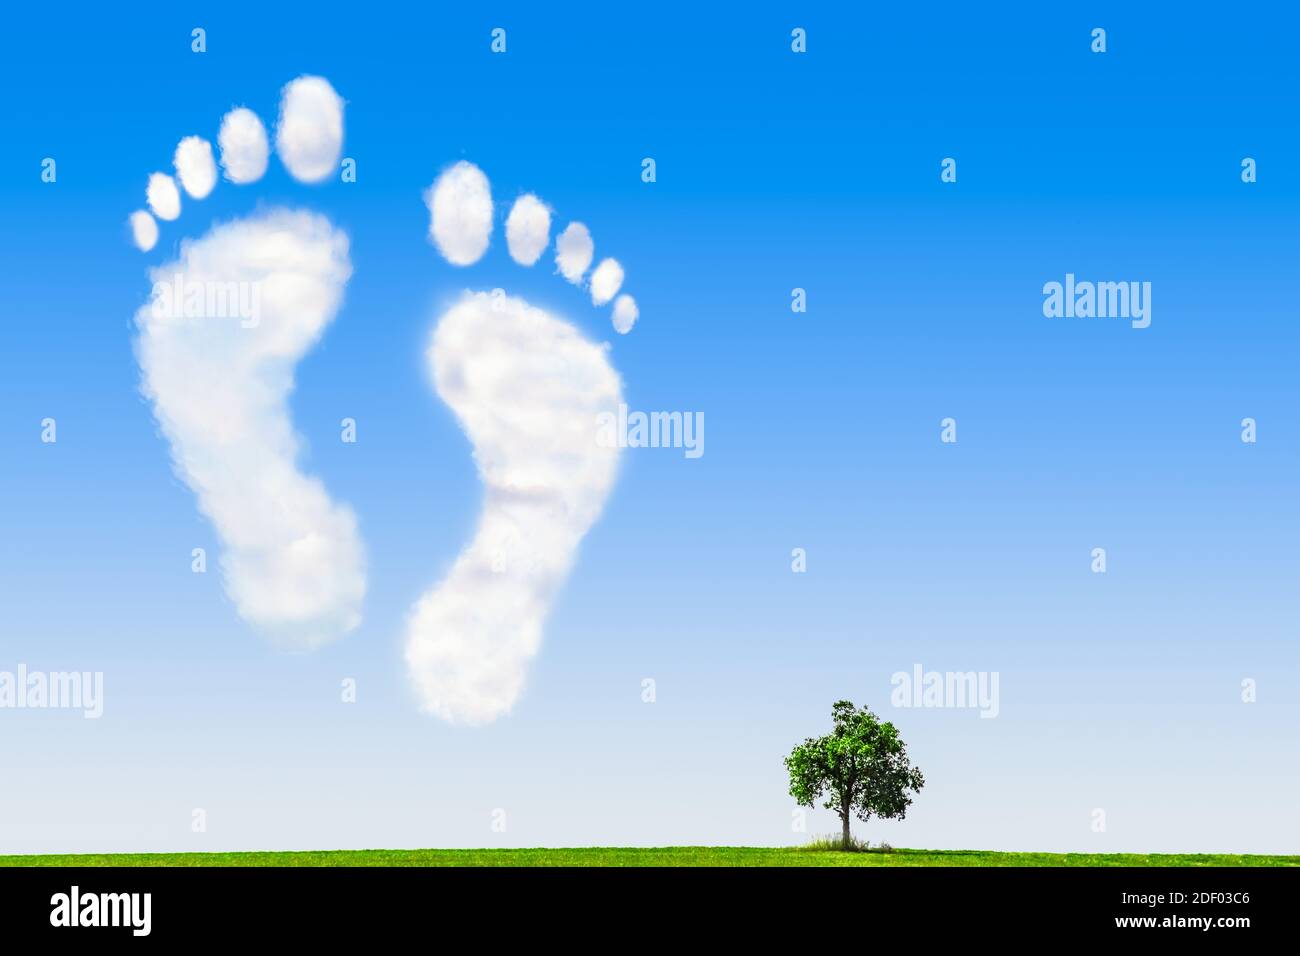 Footprints formed by Clouds on a Blue Sky Over a Green Meadow with a Tree Stock Photo